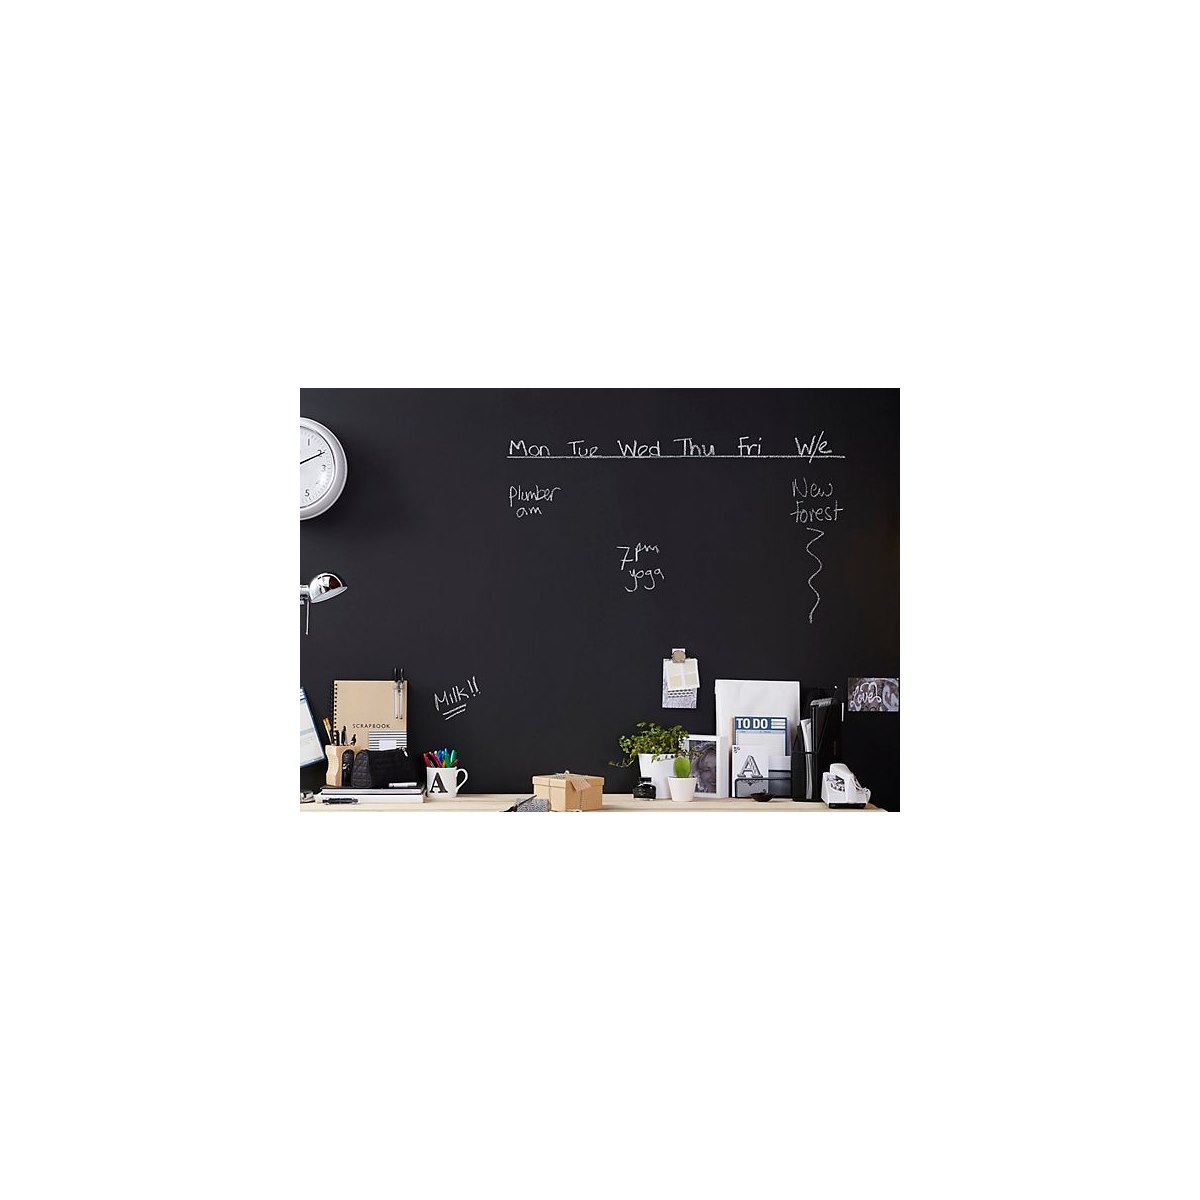 Paint for creating a Blackboard surface